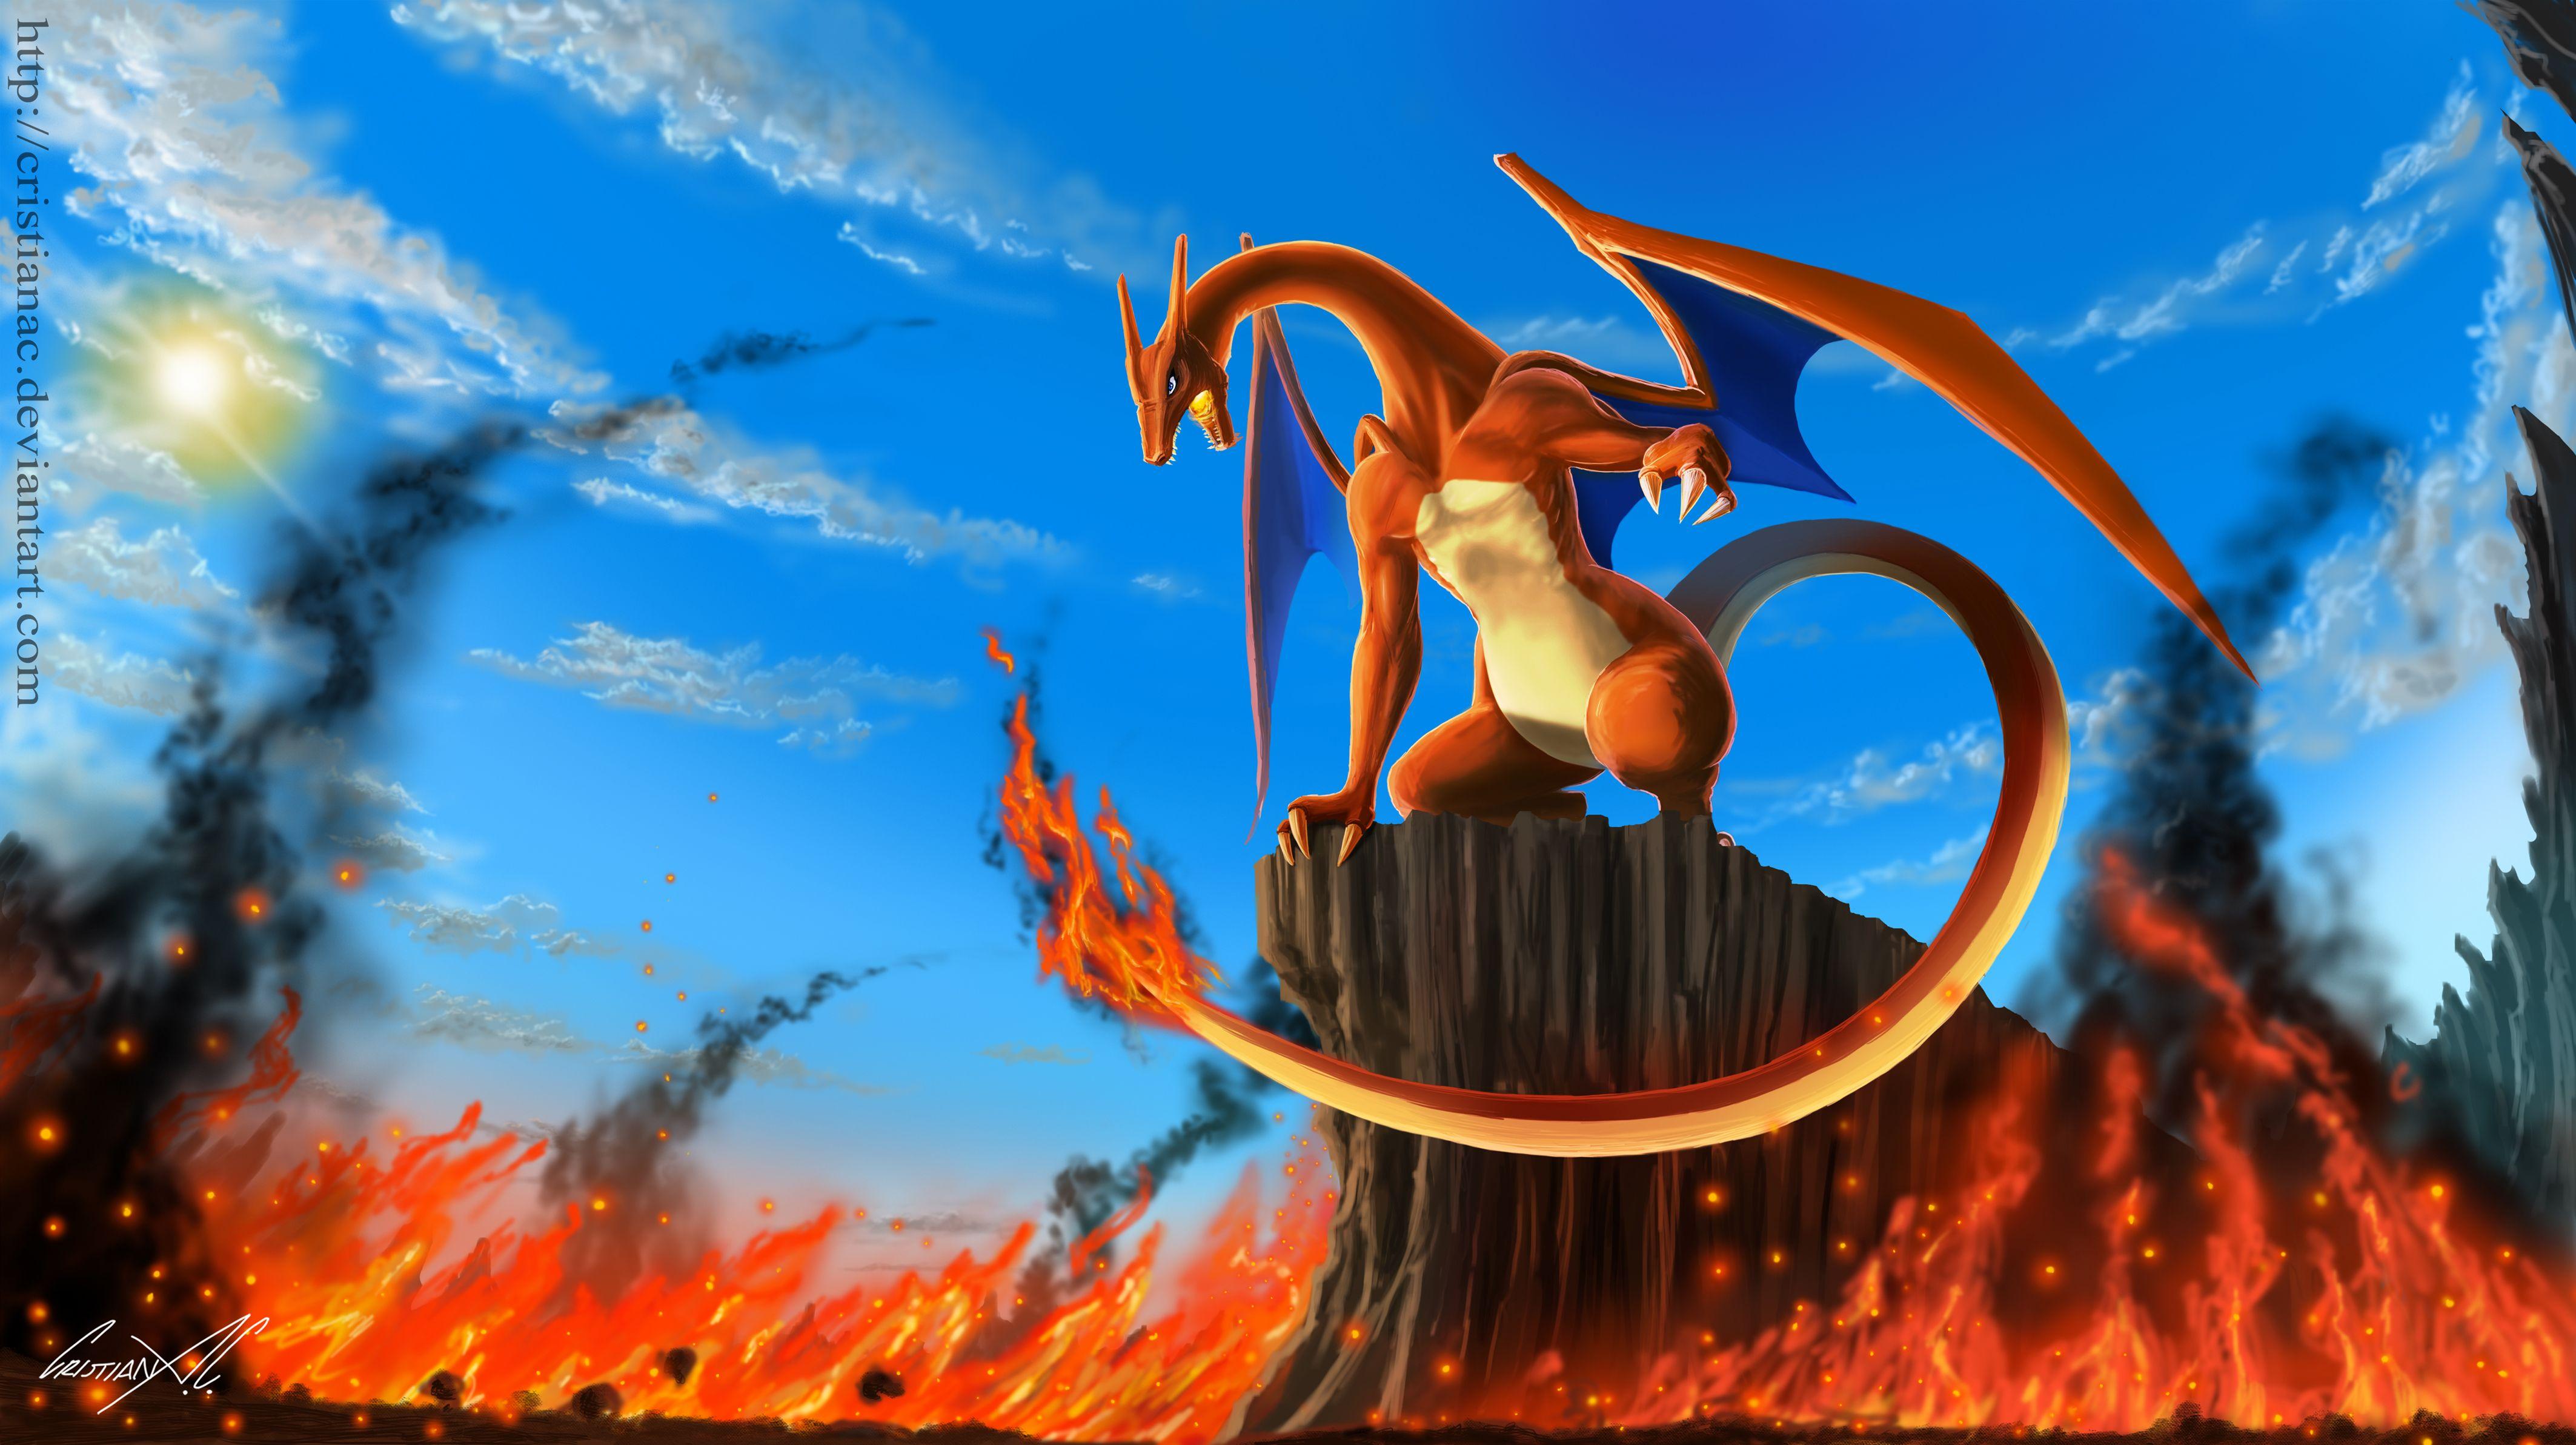 Pokemon Wallpaper HD for iPhone with Charizard  Wallpapers Clan